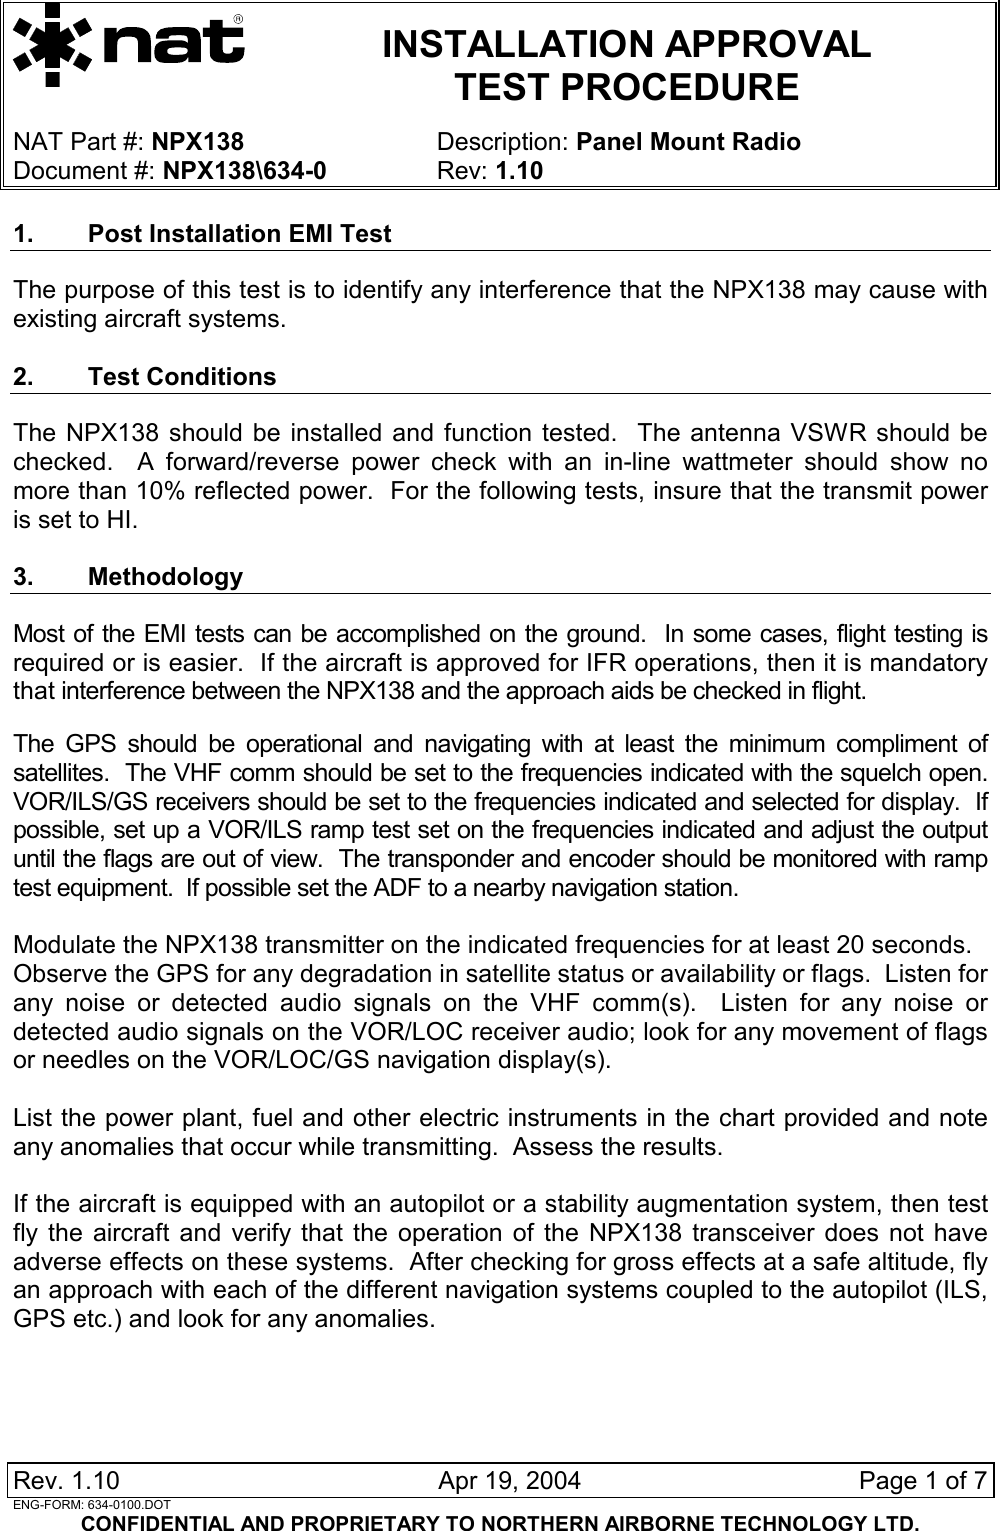   INSTALLATION APPROVAL  TEST PROCEDURE   NAT Part #: NPX138 Description: Panel Mount Radio Document #: NPX138\634-0 Rev: 1.10  Rev. 1.10   Apr 19, 2004  Page 1 of 7 ENG-FORM: 634-0100.DOT CONFIDENTIAL AND PROPRIETARY TO NORTHERN AIRBORNE TECHNOLOGY LTD. 1.  Post Installation EMI Test  The purpose of this test is to identify any interference that the NPX138 may cause with existing aircraft systems.  2. Test Conditions The NPX138 should be installed and function tested.  The antenna VSWR should be checked.  A forward/reverse power check with an in-line wattmeter should show no more than 10% reflected power.  For the following tests, insure that the transmit power is set to HI.  3. Methodology Most of the EMI tests can be accomplished on the ground.  In some cases, flight testing is required or is easier.  If the aircraft is approved for IFR operations, then it is mandatory that interference between the NPX138 and the approach aids be checked in flight.  The GPS should be operational and navigating with at least the minimum compliment of satellites.  The VHF comm should be set to the frequencies indicated with the squelch open. VOR/ILS/GS receivers should be set to the frequencies indicated and selected for display.  If possible, set up a VOR/ILS ramp test set on the frequencies indicated and adjust the output until the flags are out of view.  The transponder and encoder should be monitored with ramp test equipment.  If possible set the ADF to a nearby navigation station.  Modulate the NPX138 transmitter on the indicated frequencies for at least 20 seconds. Observe the GPS for any degradation in satellite status or availability or flags.  Listen for any noise or detected audio signals on the VHF comm(s).  Listen for any noise or detected audio signals on the VOR/LOC receiver audio; look for any movement of flags or needles on the VOR/LOC/GS navigation display(s).  List the power plant, fuel and other electric instruments in the chart provided and note any anomalies that occur while transmitting.  Assess the results.  If the aircraft is equipped with an autopilot or a stability augmentation system, then test fly the aircraft and verify that the operation of the NPX138 transceiver does not have adverse effects on these systems.  After checking for gross effects at a safe altitude, fly an approach with each of the different navigation systems coupled to the autopilot (ILS, GPS etc.) and look for any anomalies.  